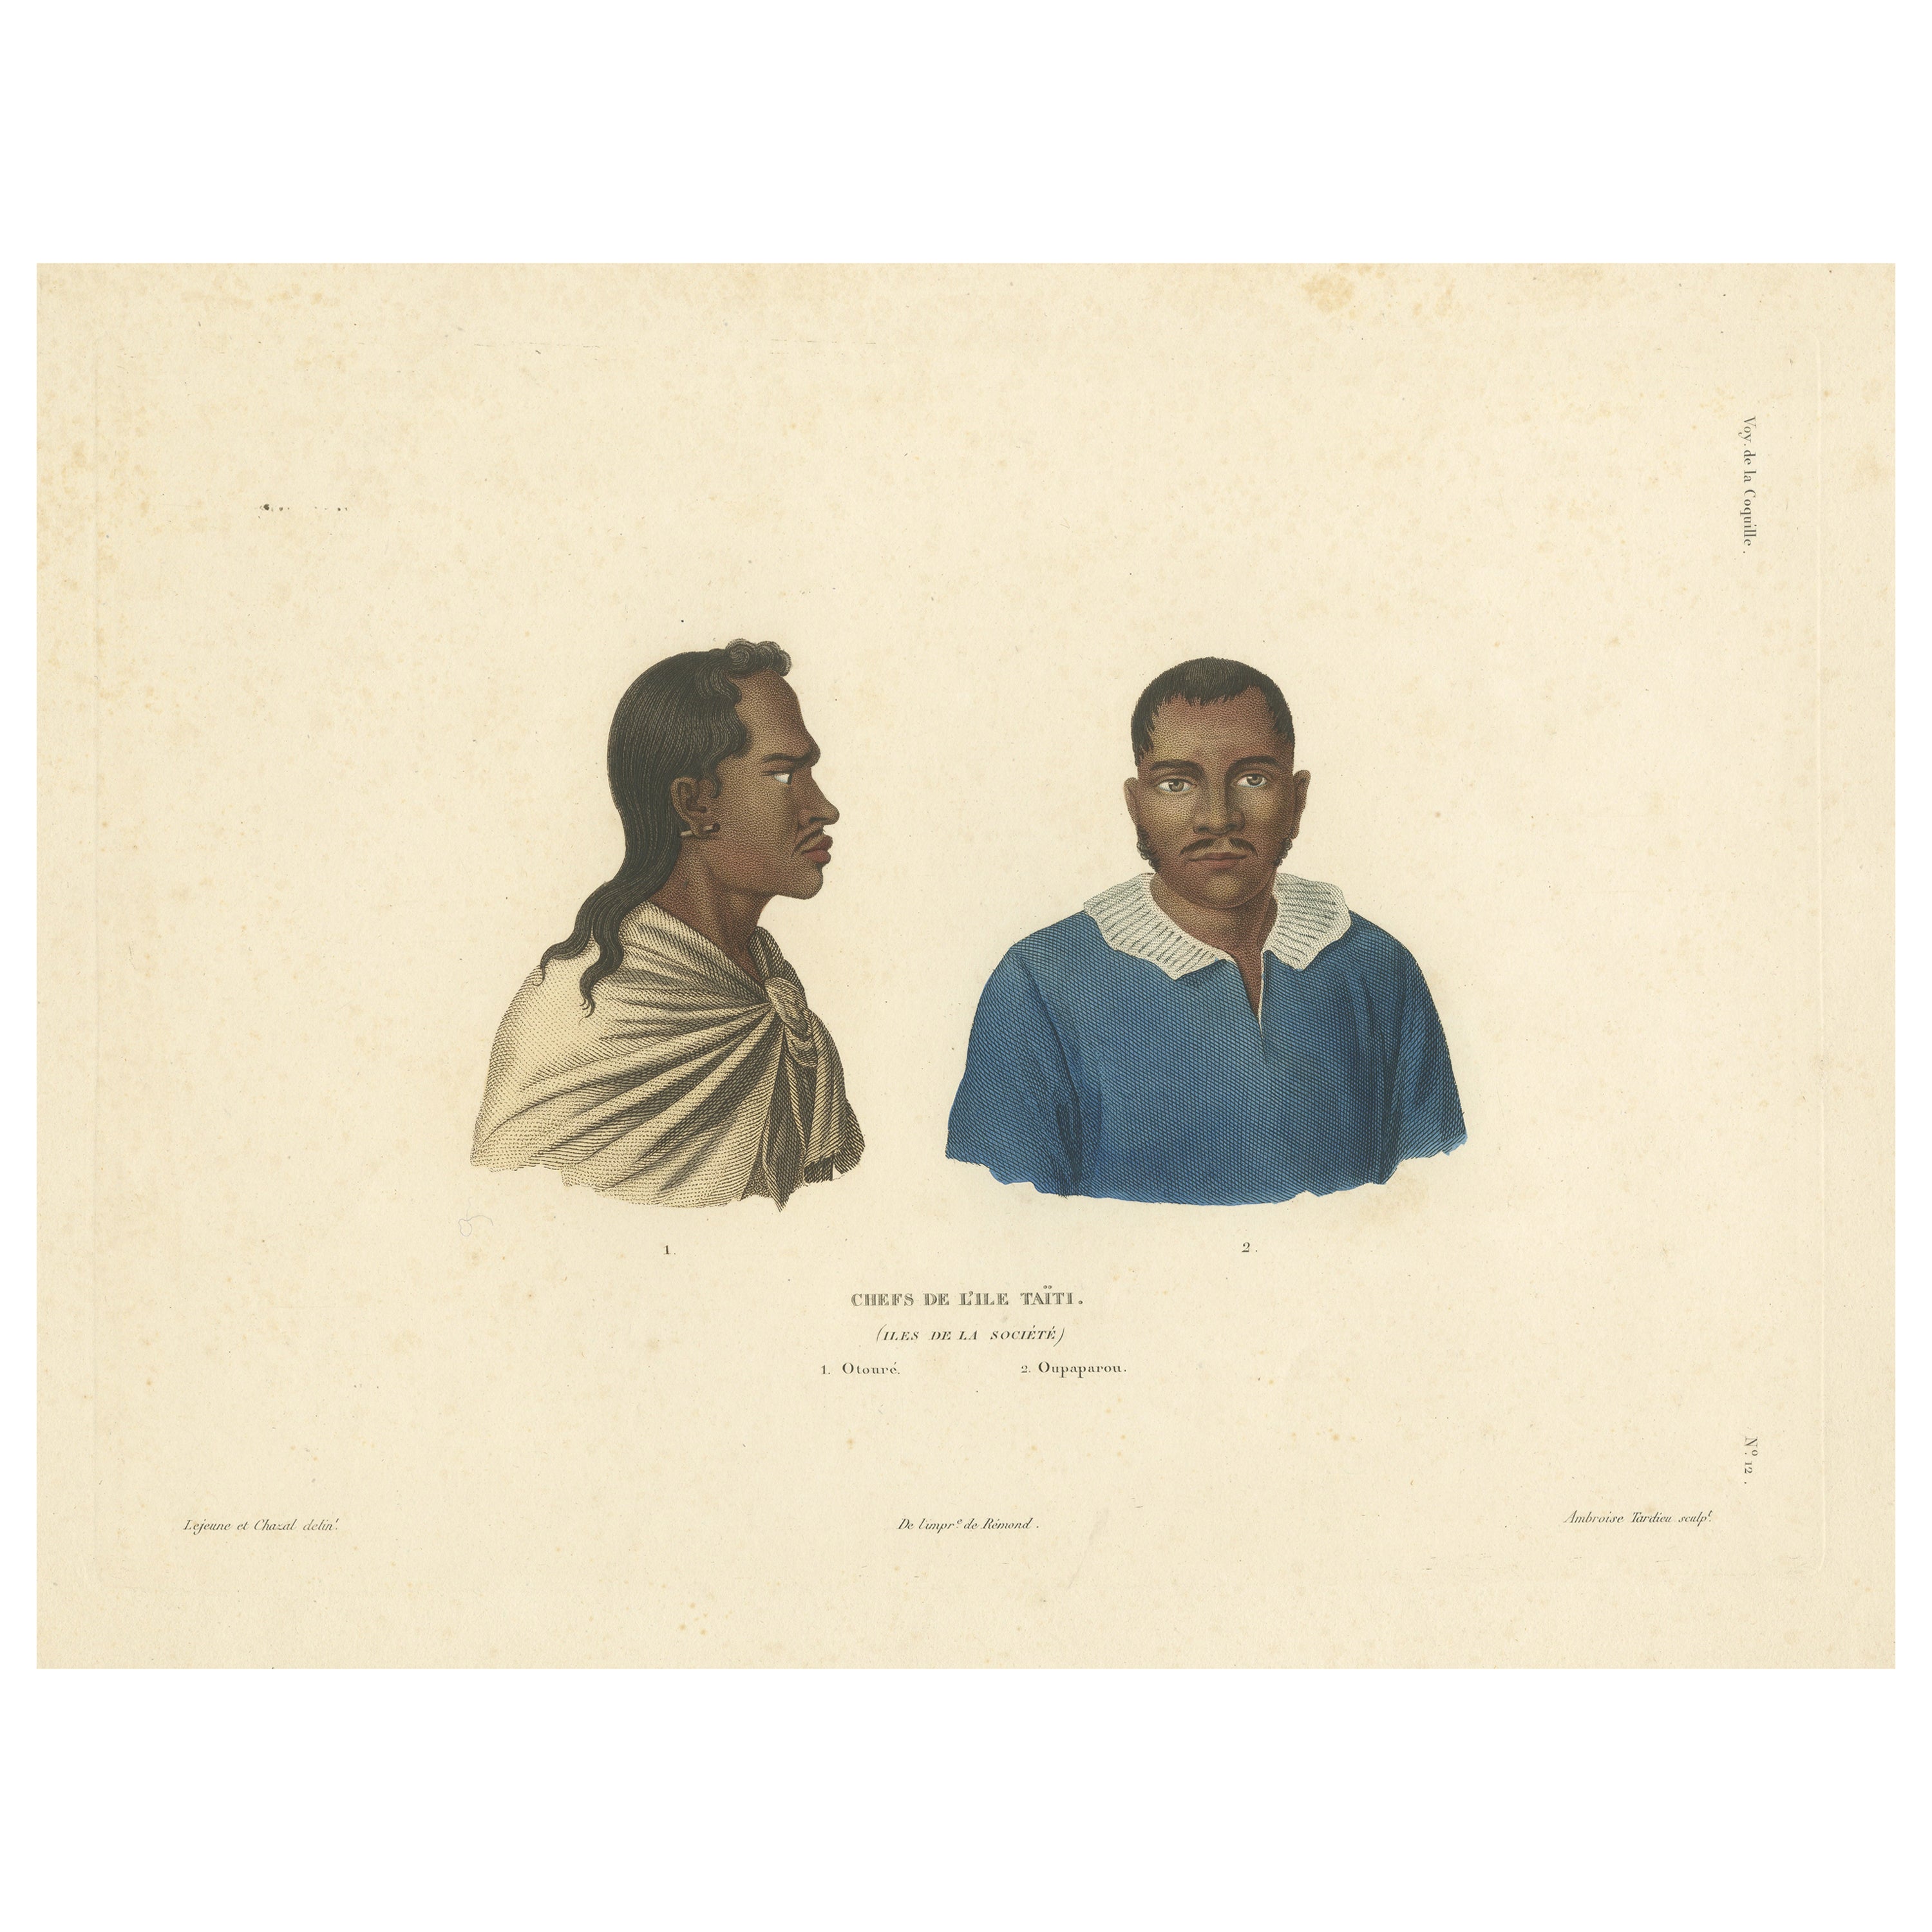 Antique Print of Otouré and Oupaparou, Heads of the Island of Tahiti